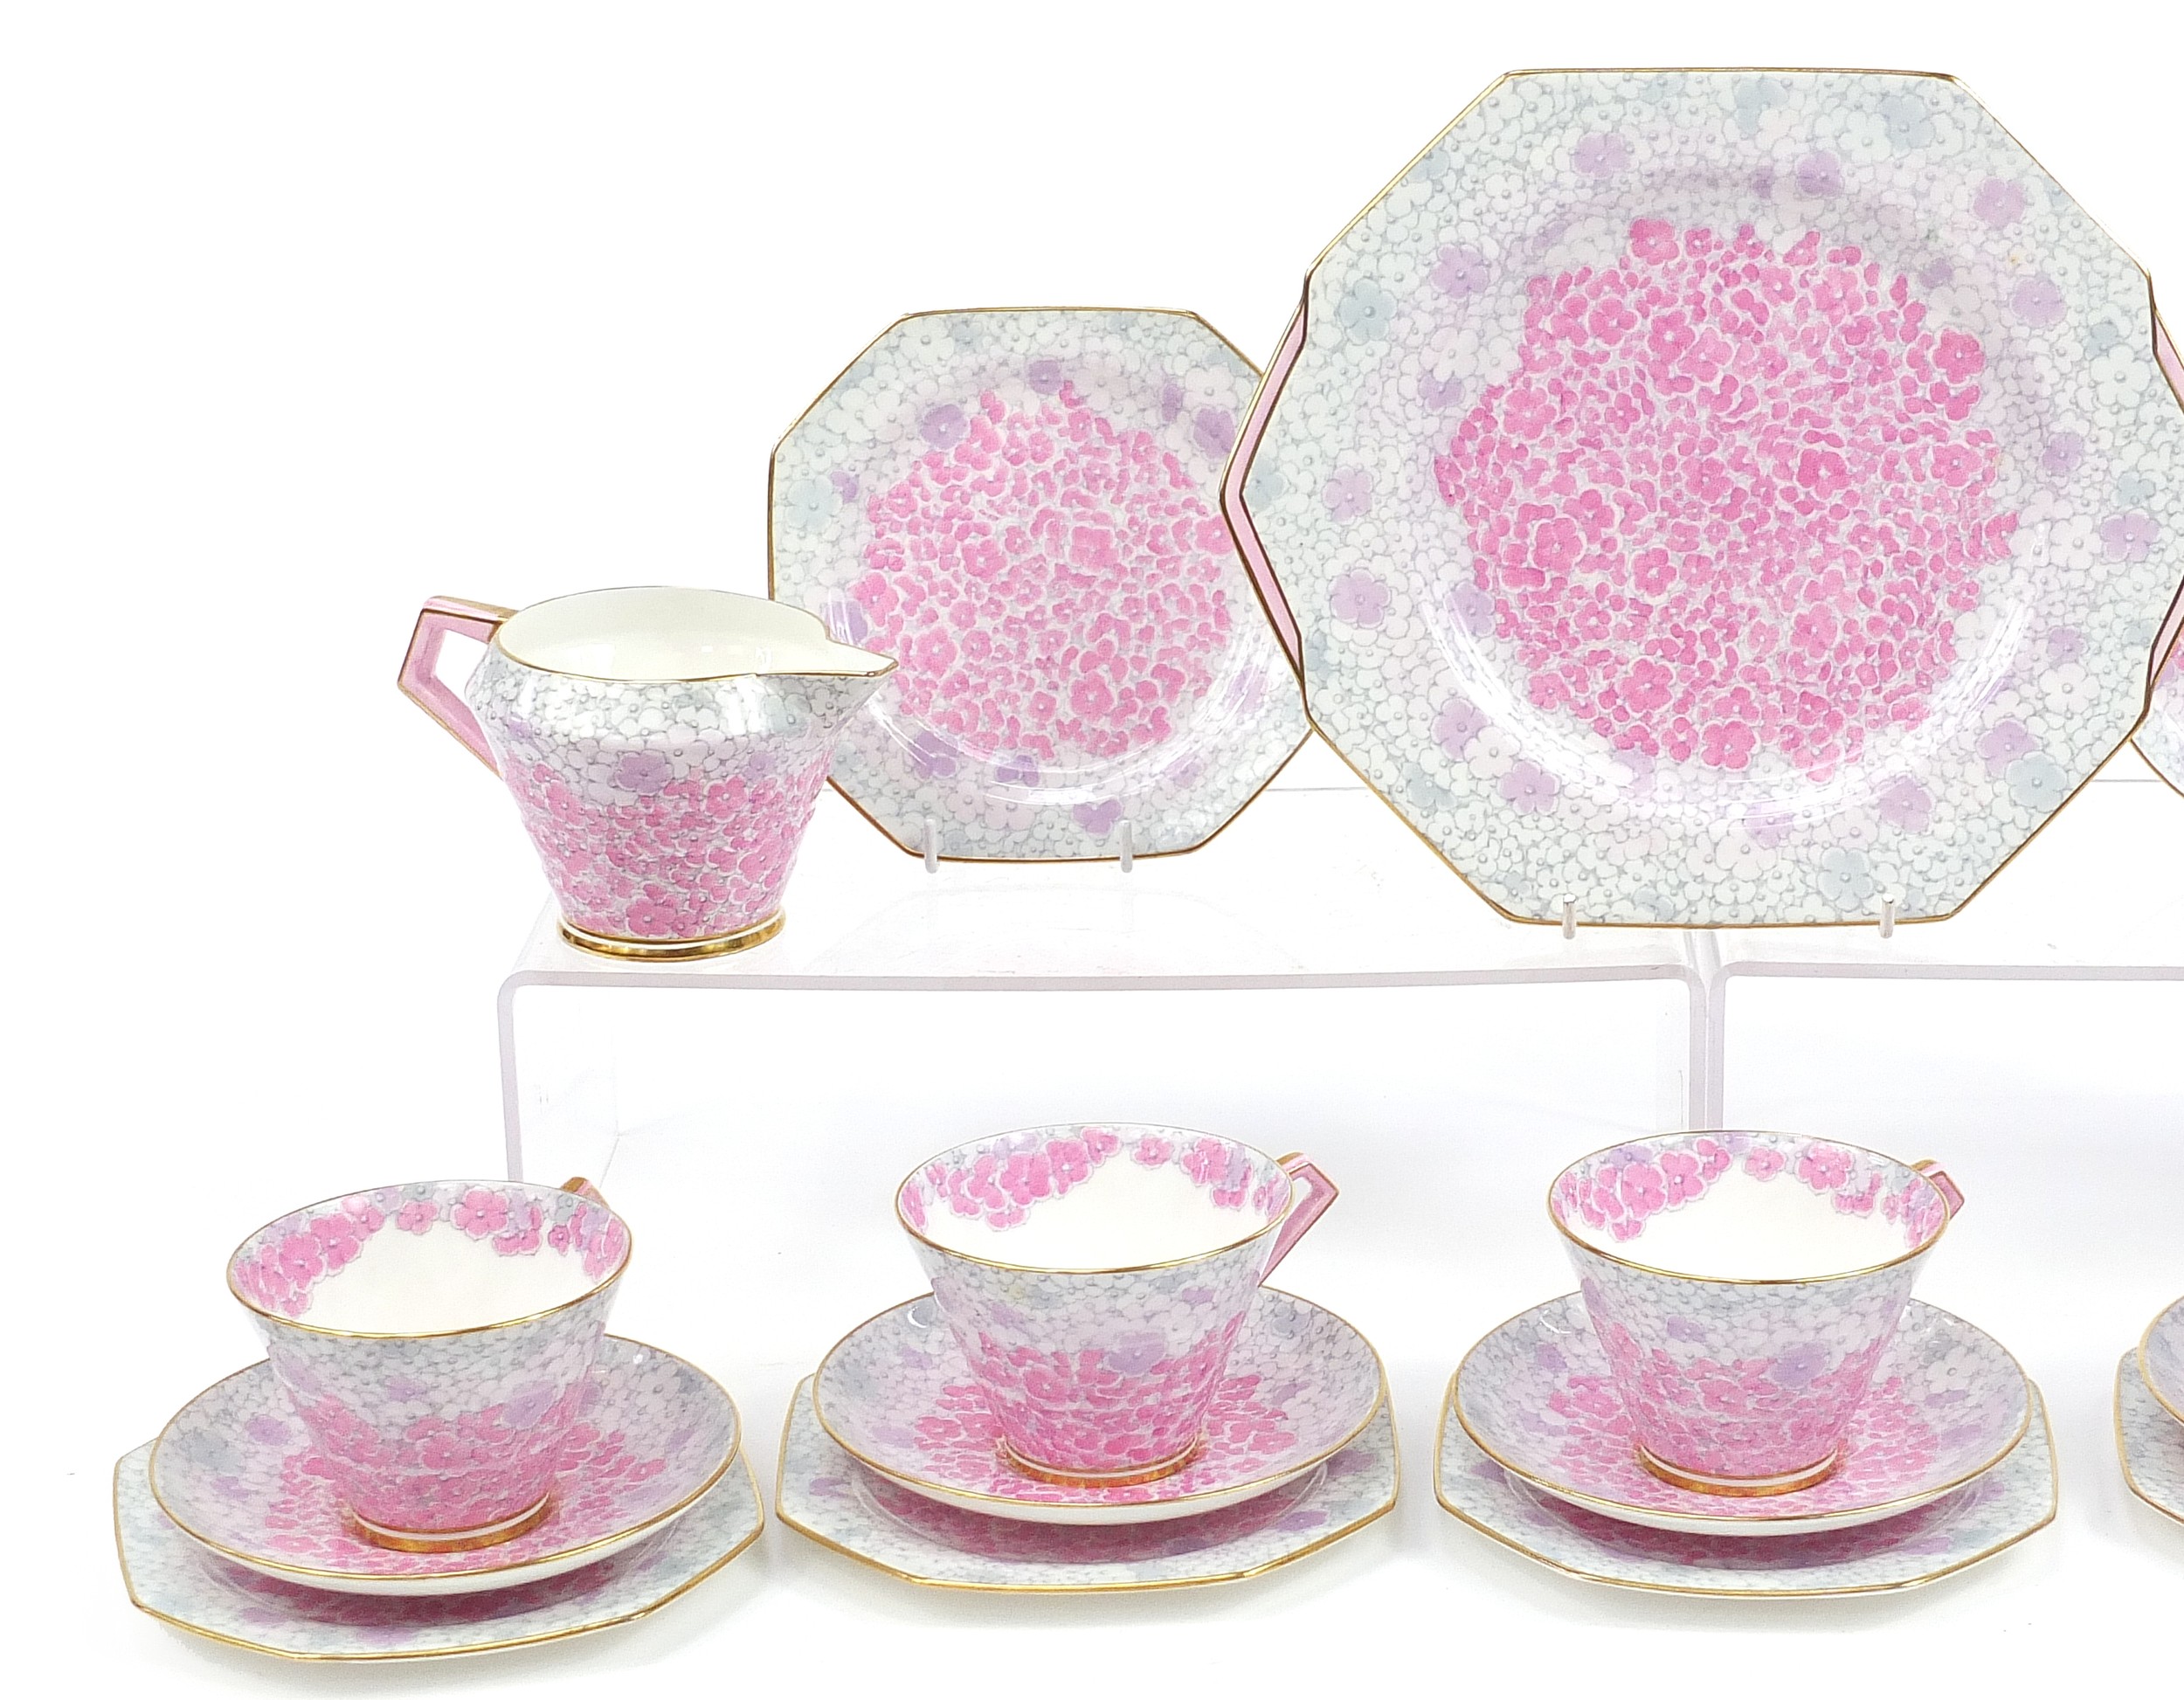 Royal Paragon tea ware, replica of service made for HM The Queen, the largest 25.5cm wide - Image 2 of 4